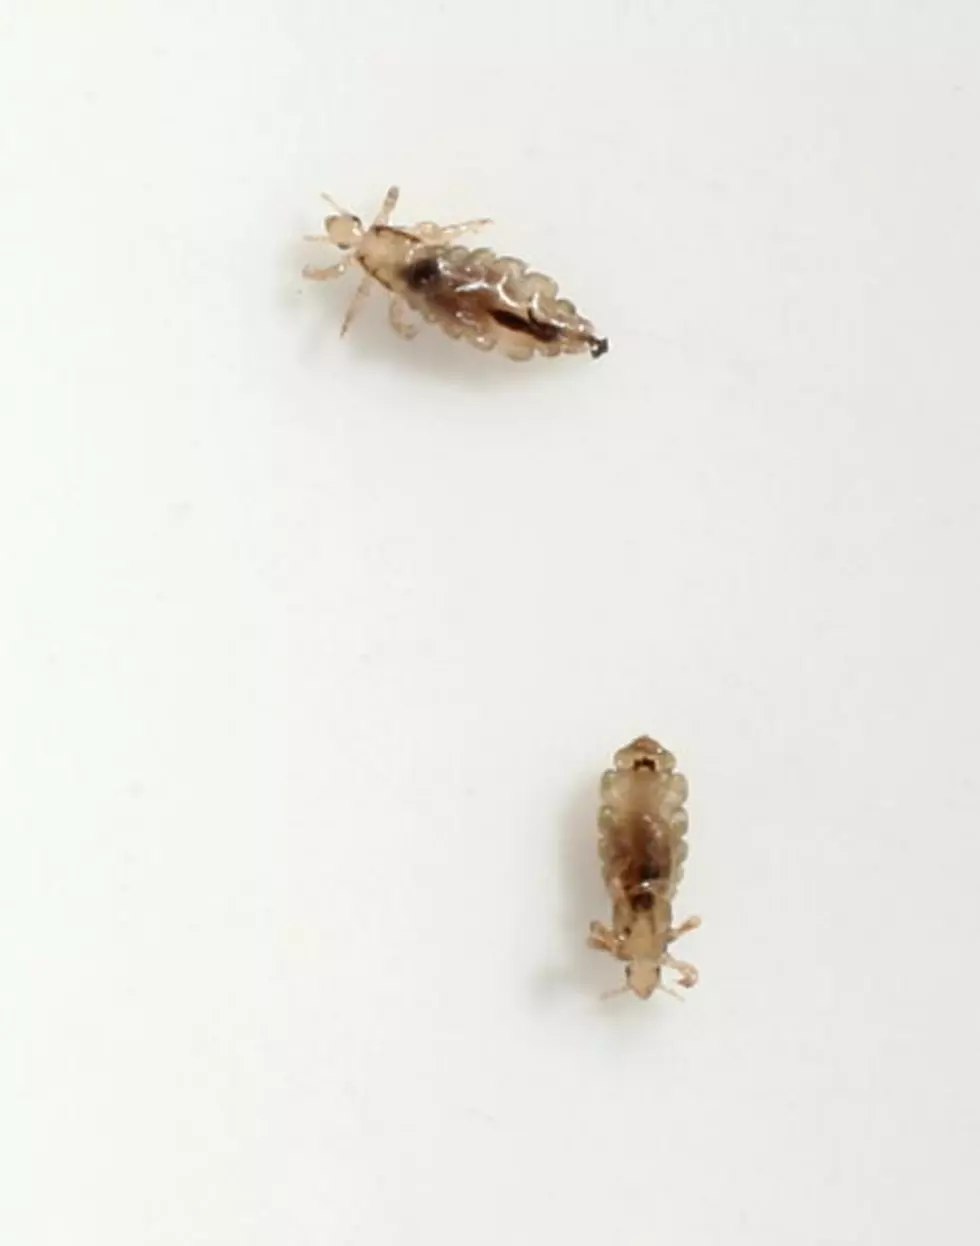 Lice Becoming More Difficult To Fight In America